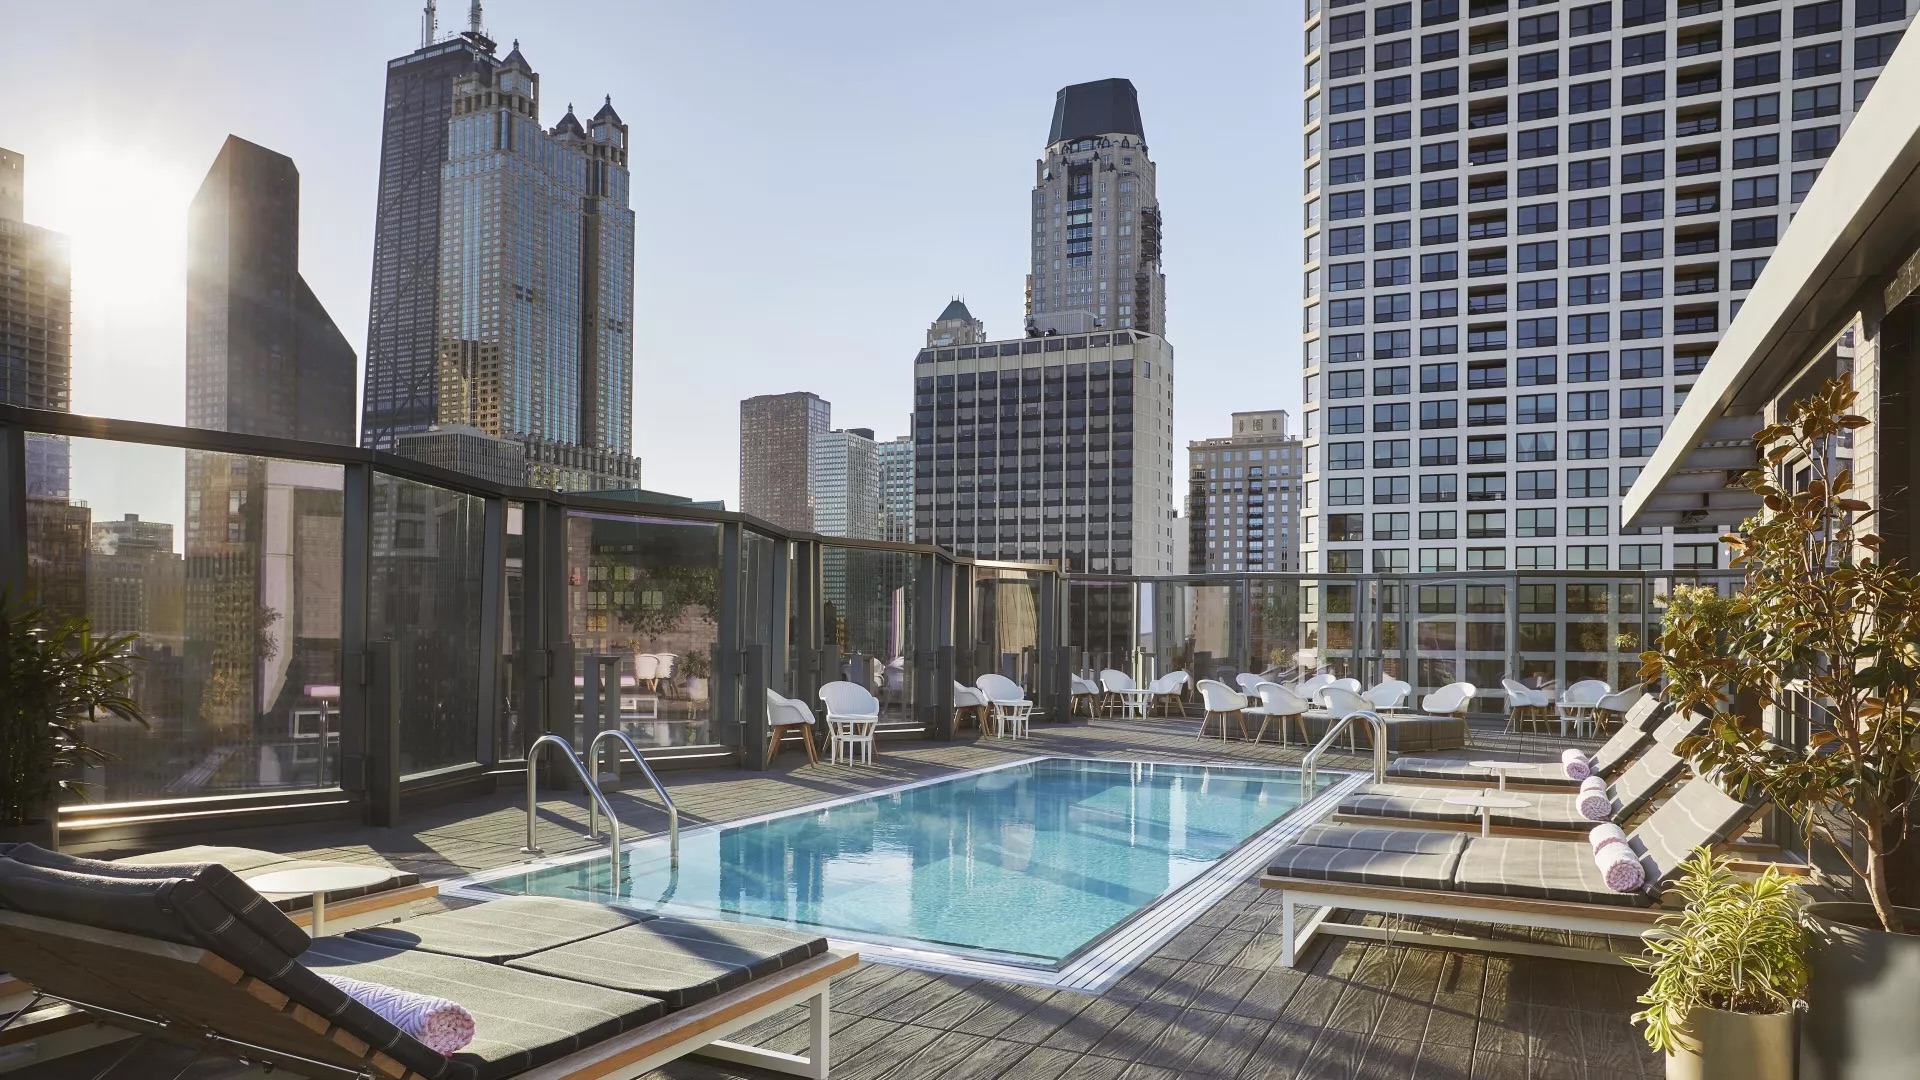 This Luxury Chicago Hotel Is Ideally Set in the Trendy Gold Coast ...